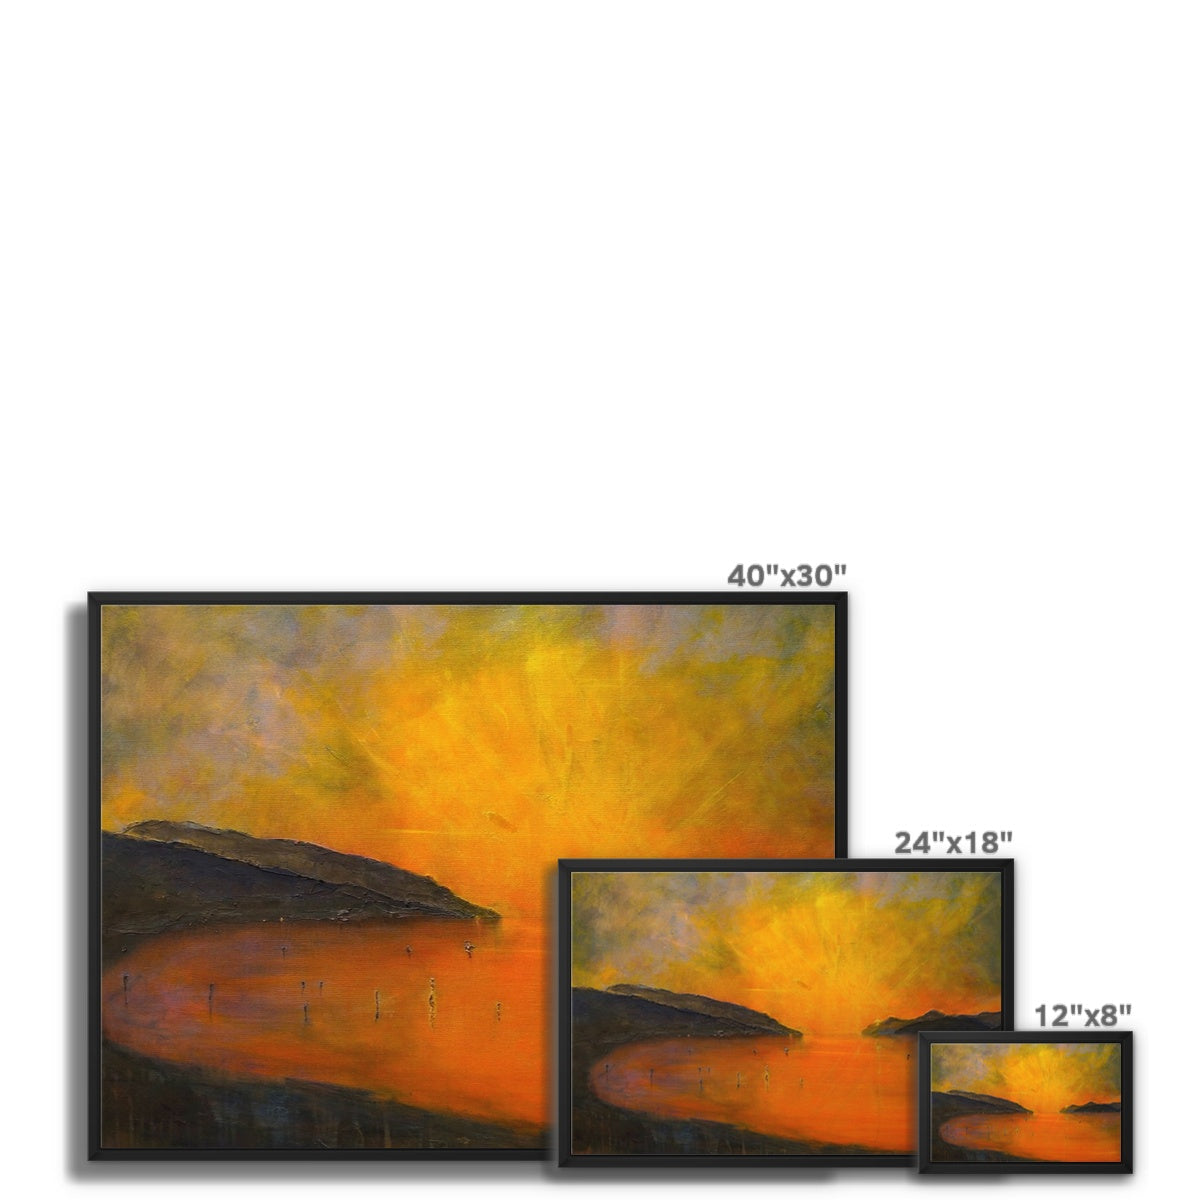 Loch Ness Sunset Painting | Framed Canvas From Scotland-Floating Framed Canvas Prints-Scottish Lochs & Mountains Art Gallery-Paintings, Prints, Homeware, Art Gifts From Scotland By Scottish Artist Kevin Hunter